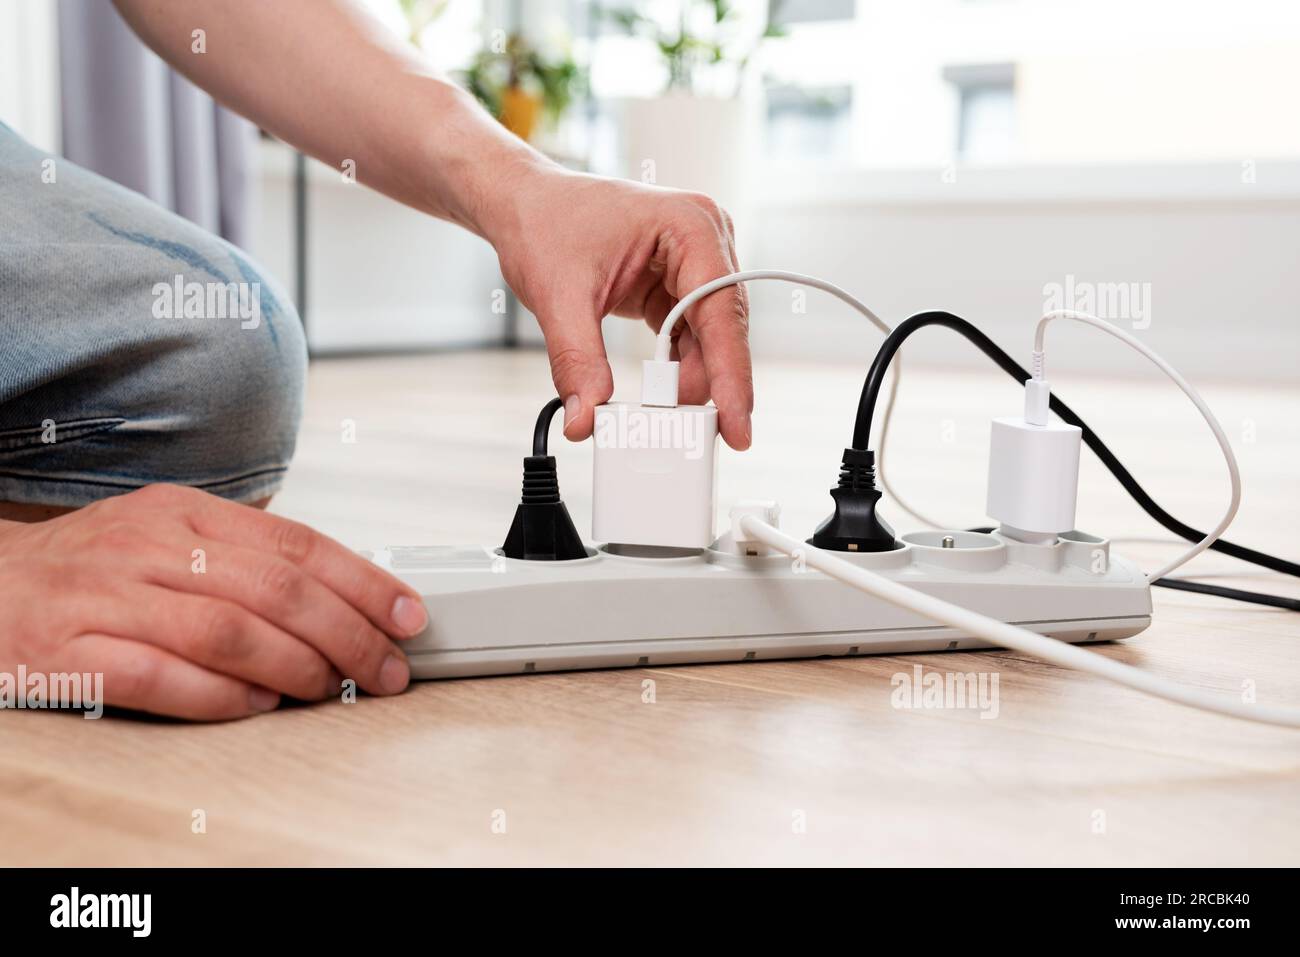 Electrical plug in outlet socket at home. Energy efficiency concept Stock Photo